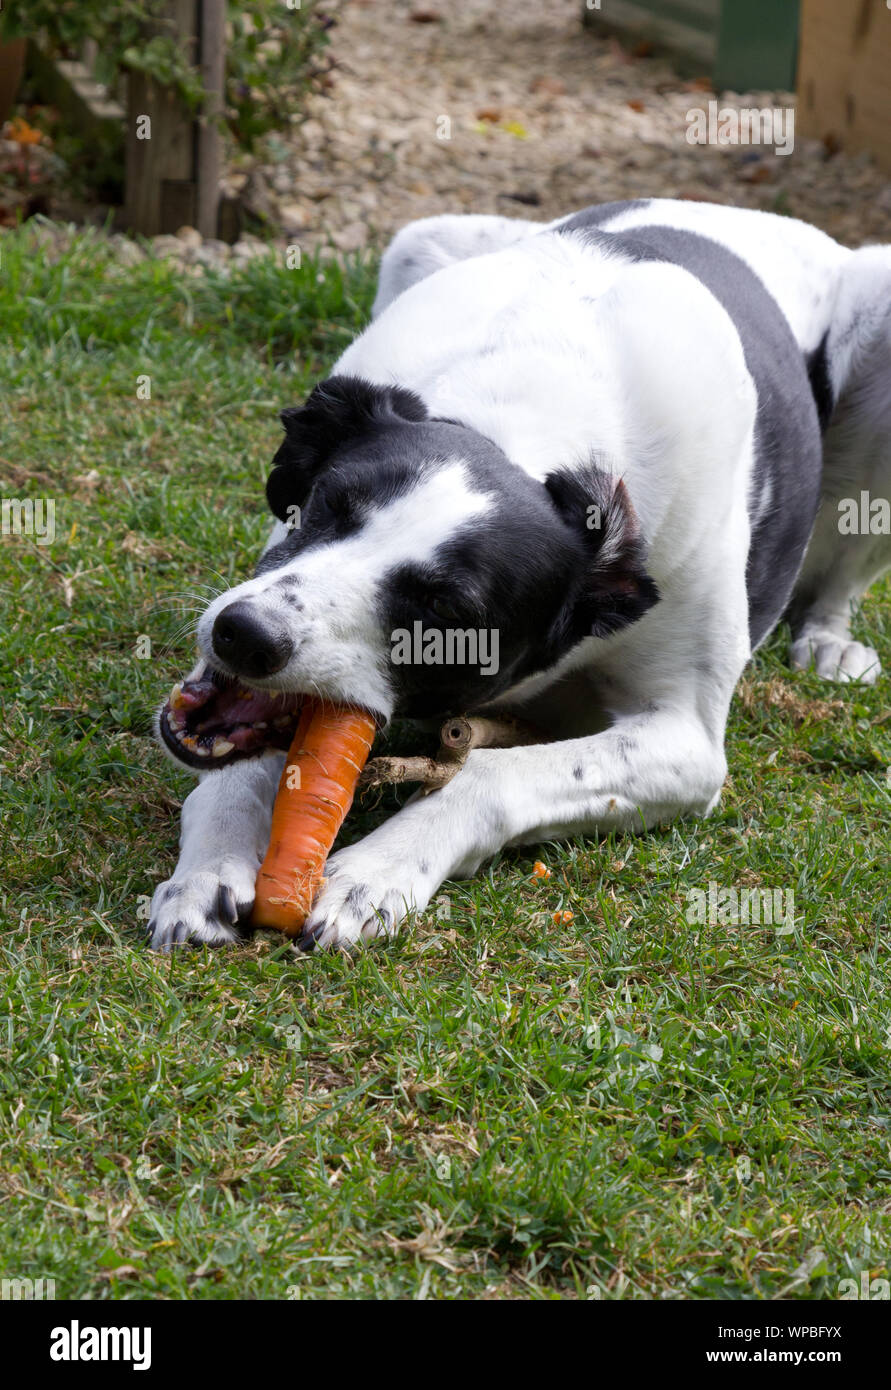 Lurcher dog eating a carrot Stock Photo